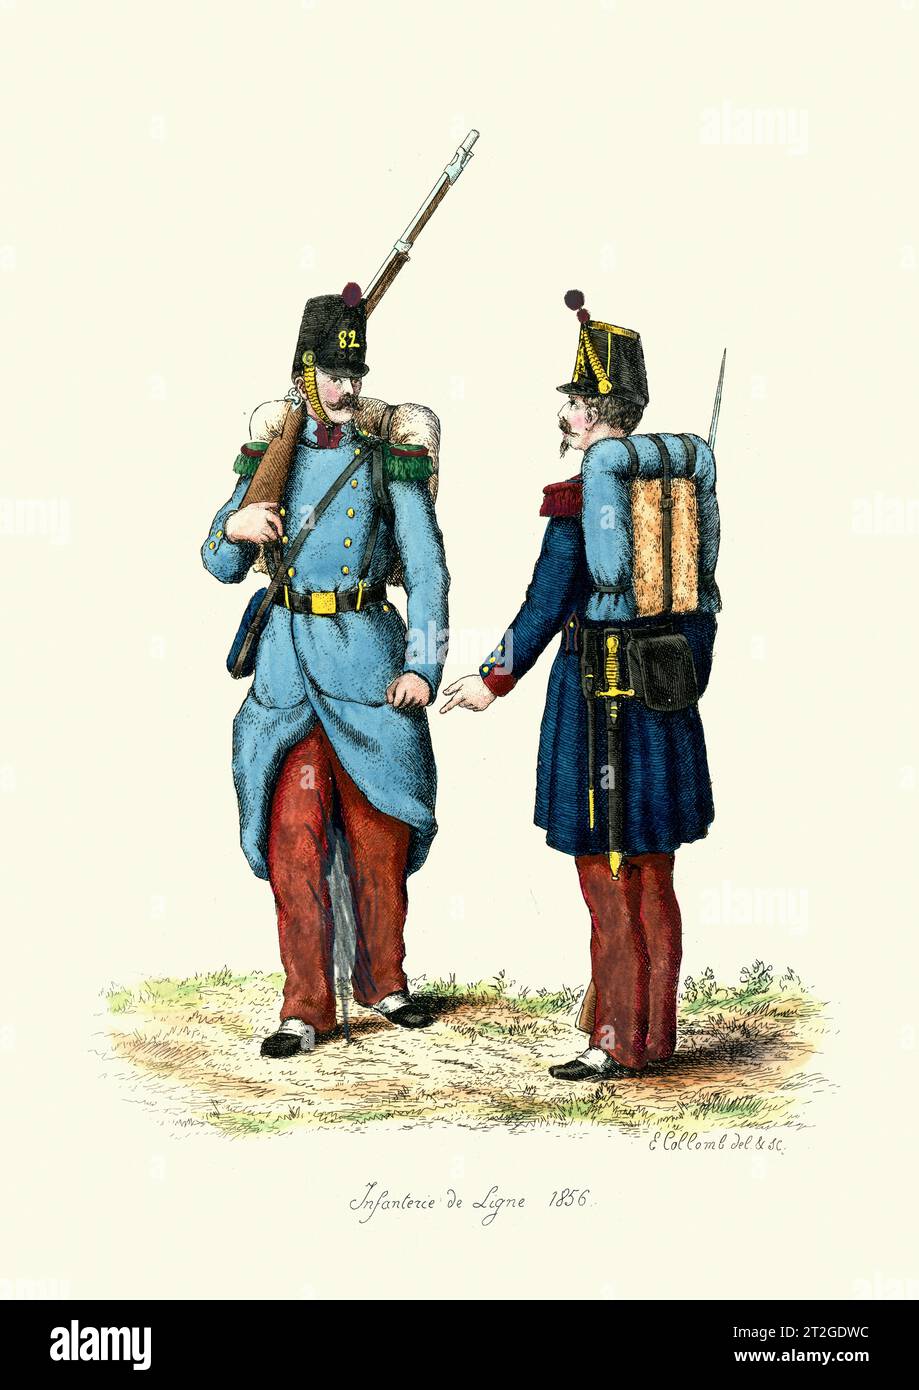 French Military Uniforms, 19th Century, History, Infantry soliders, 1850s, Infanterie de Ligne Stock Photo